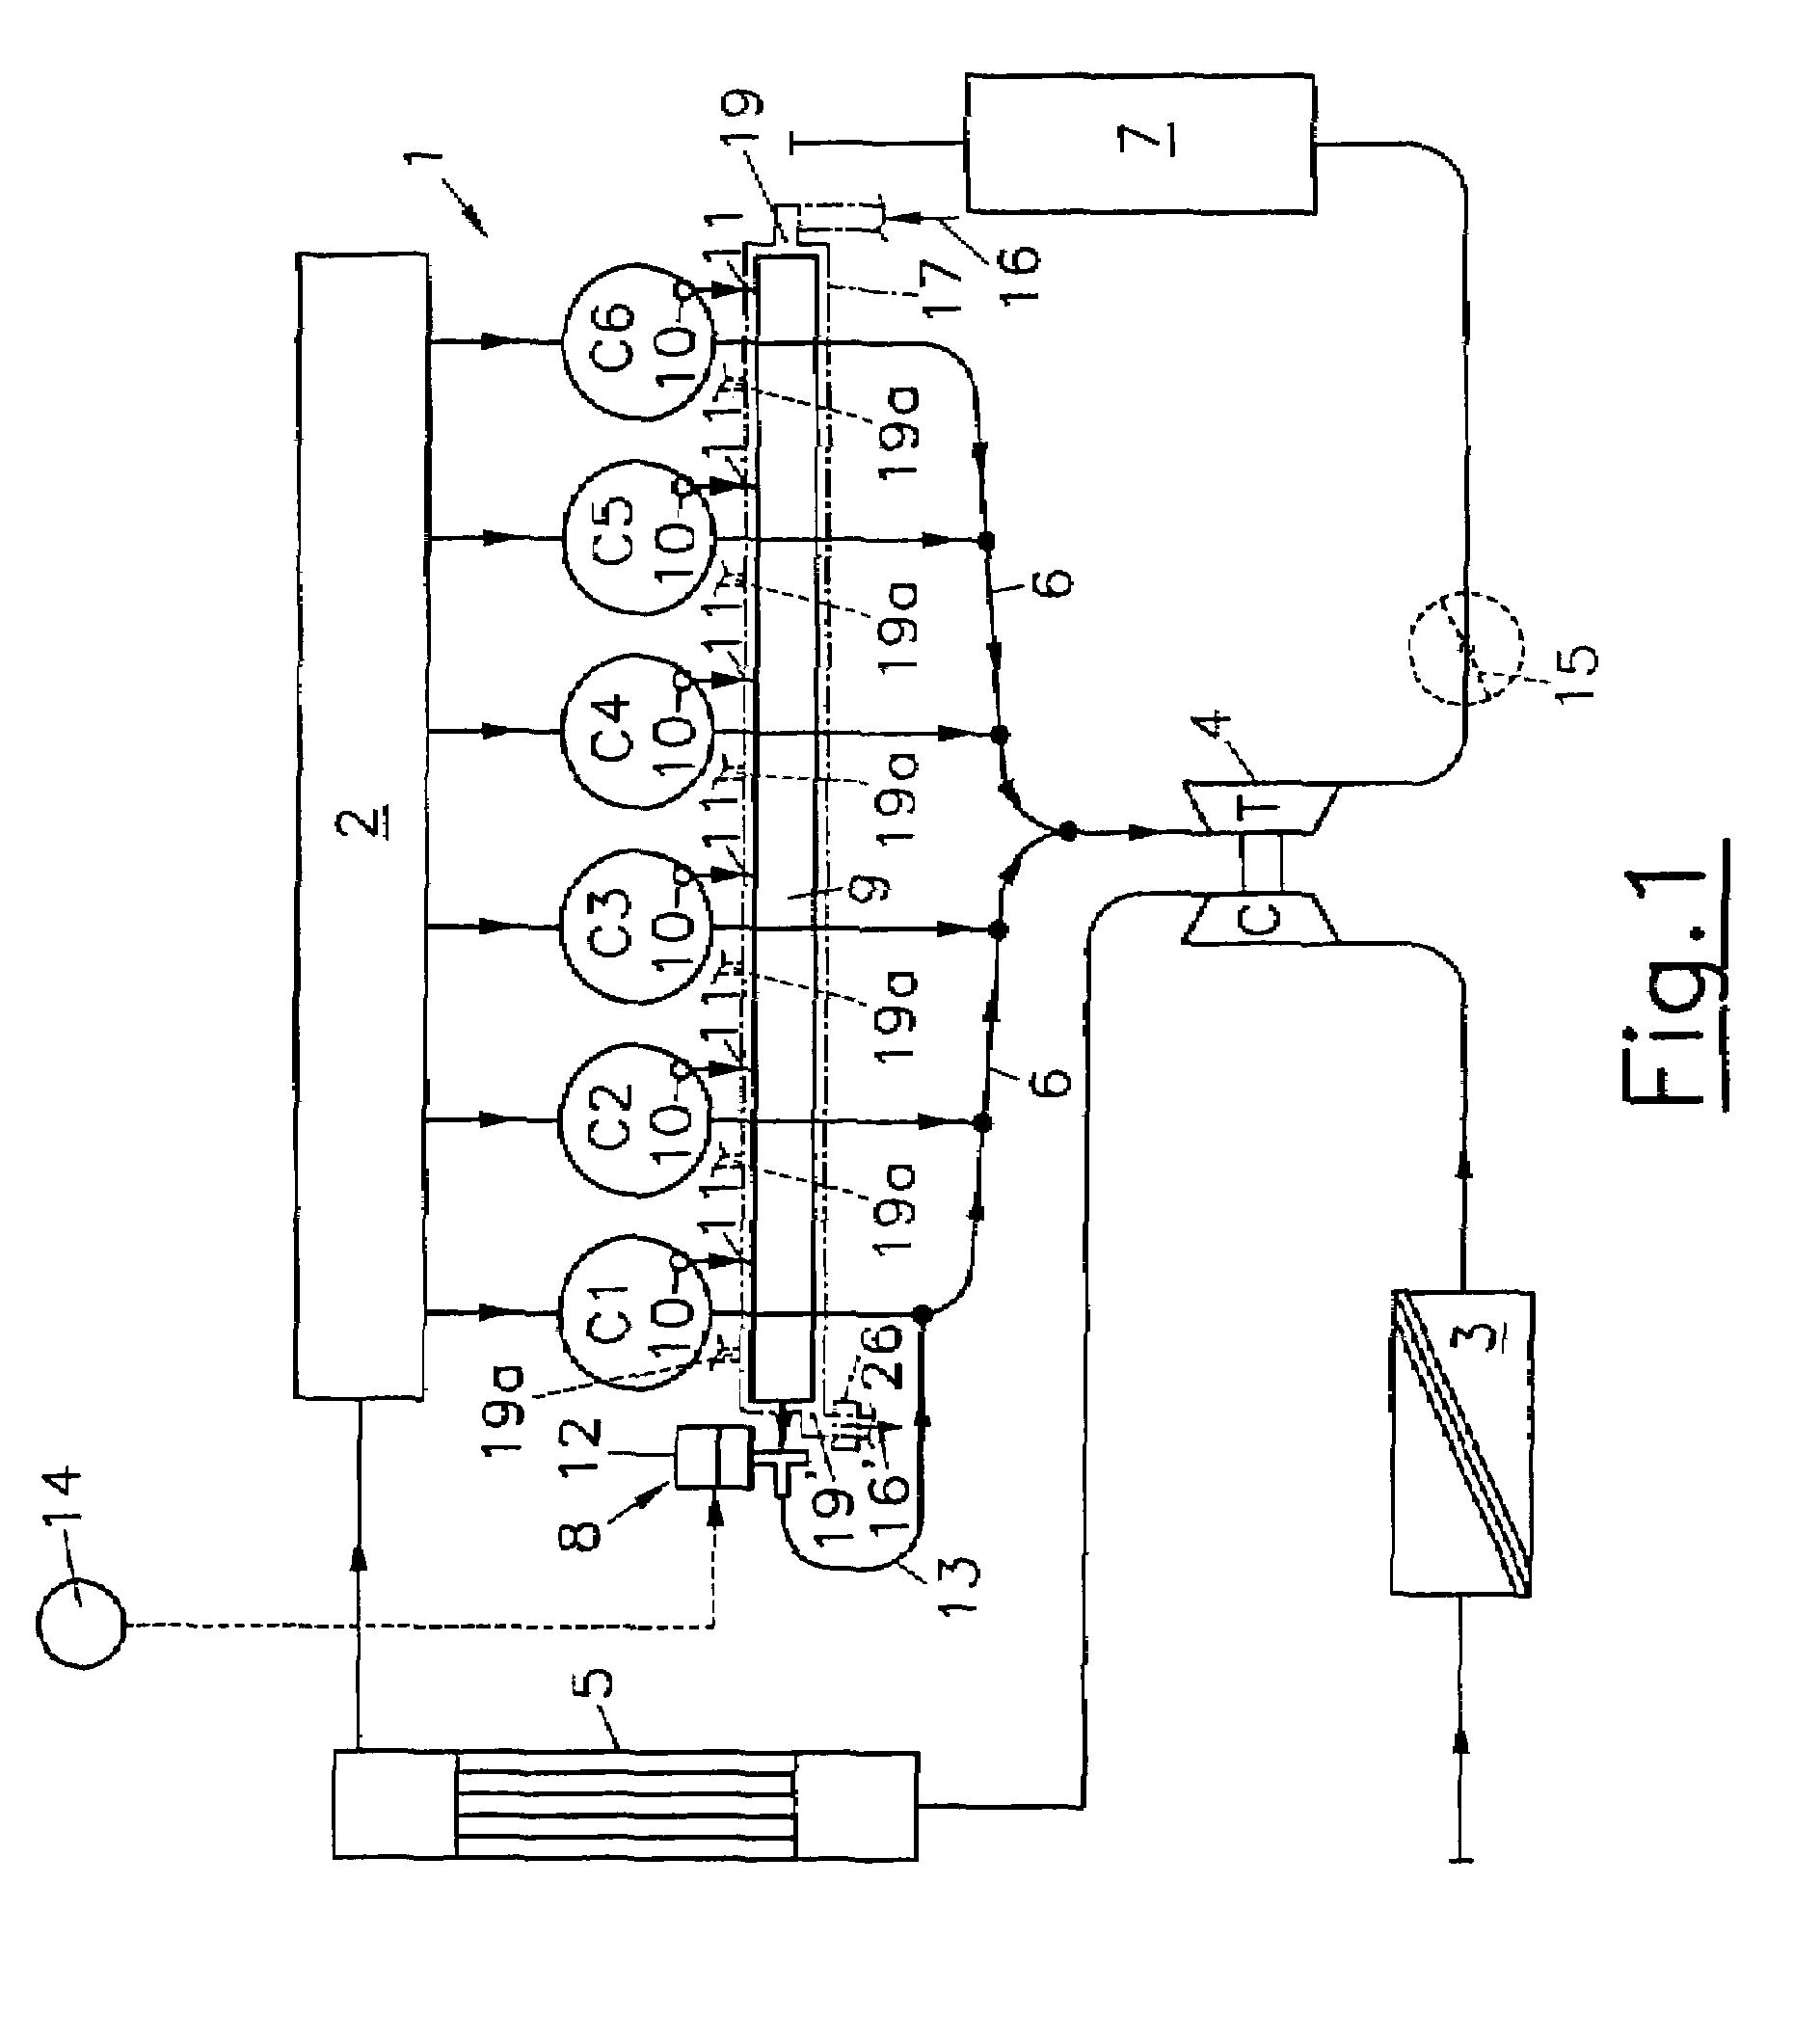 Engine brake system of a multicylinder internal combustion engine comprising a cooled intermediate pipe for exchanging gas between cylinders during engine braking